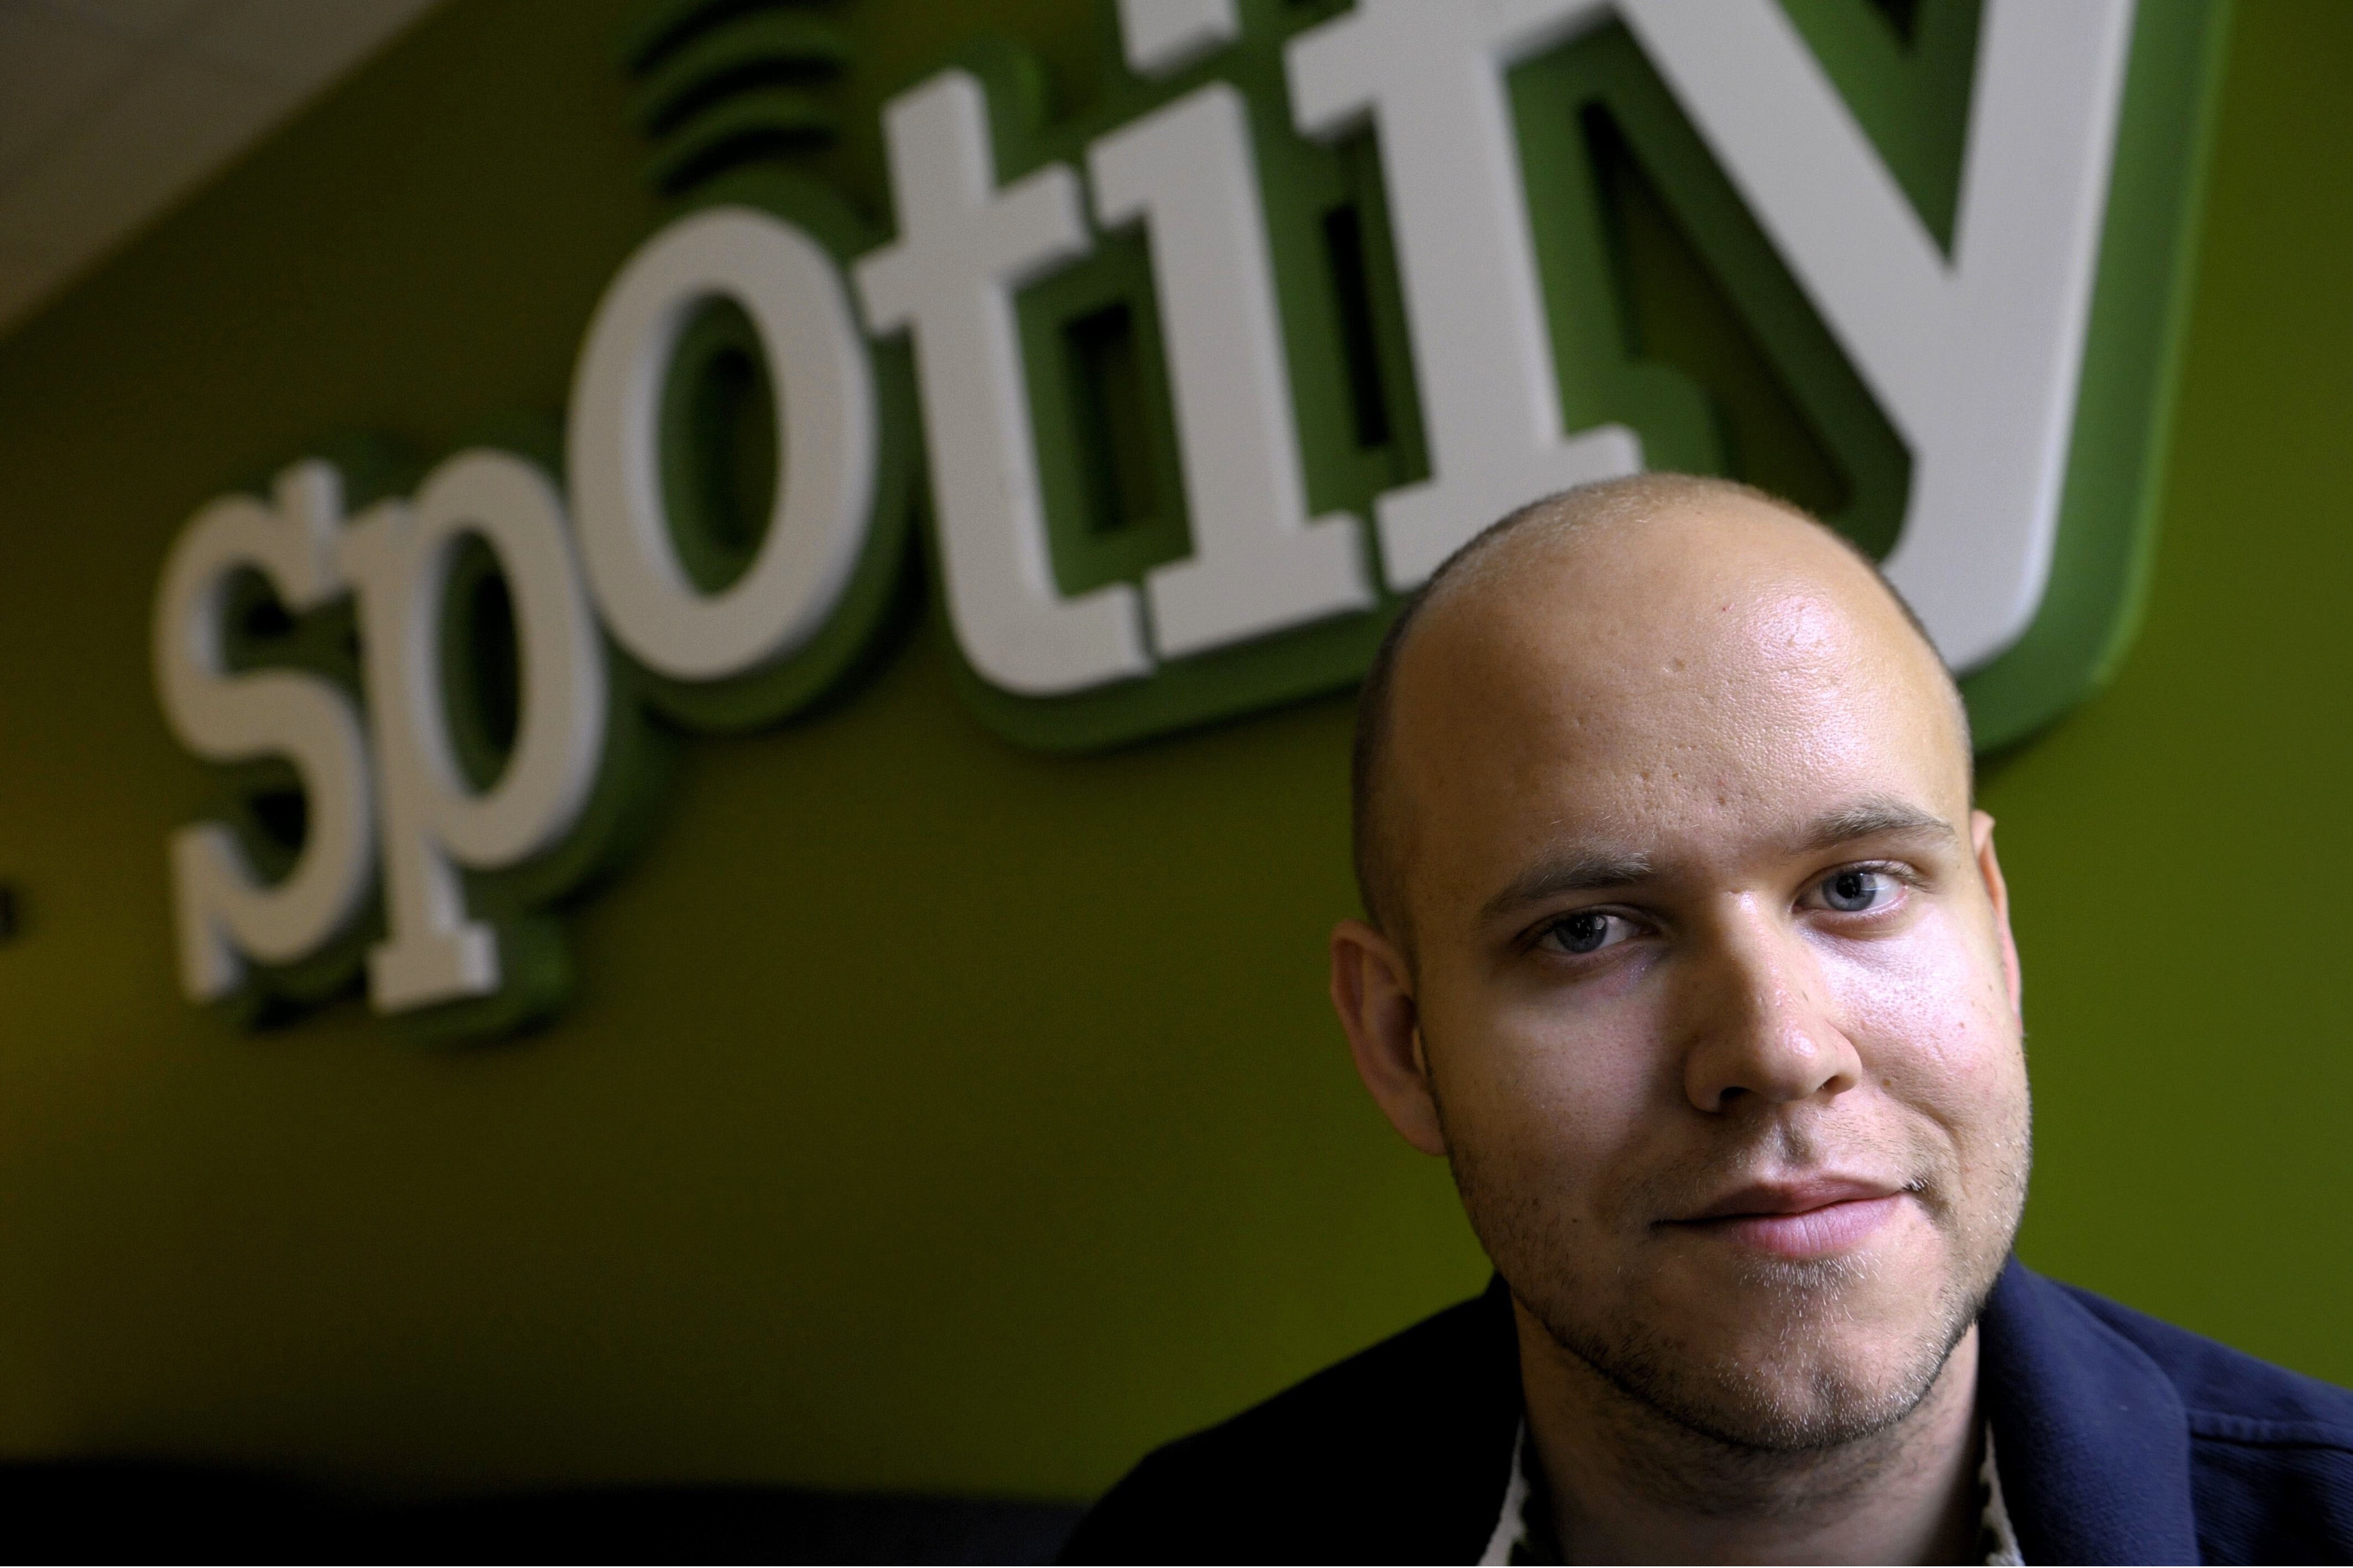 Spotify has filed for a $1 billion IPO